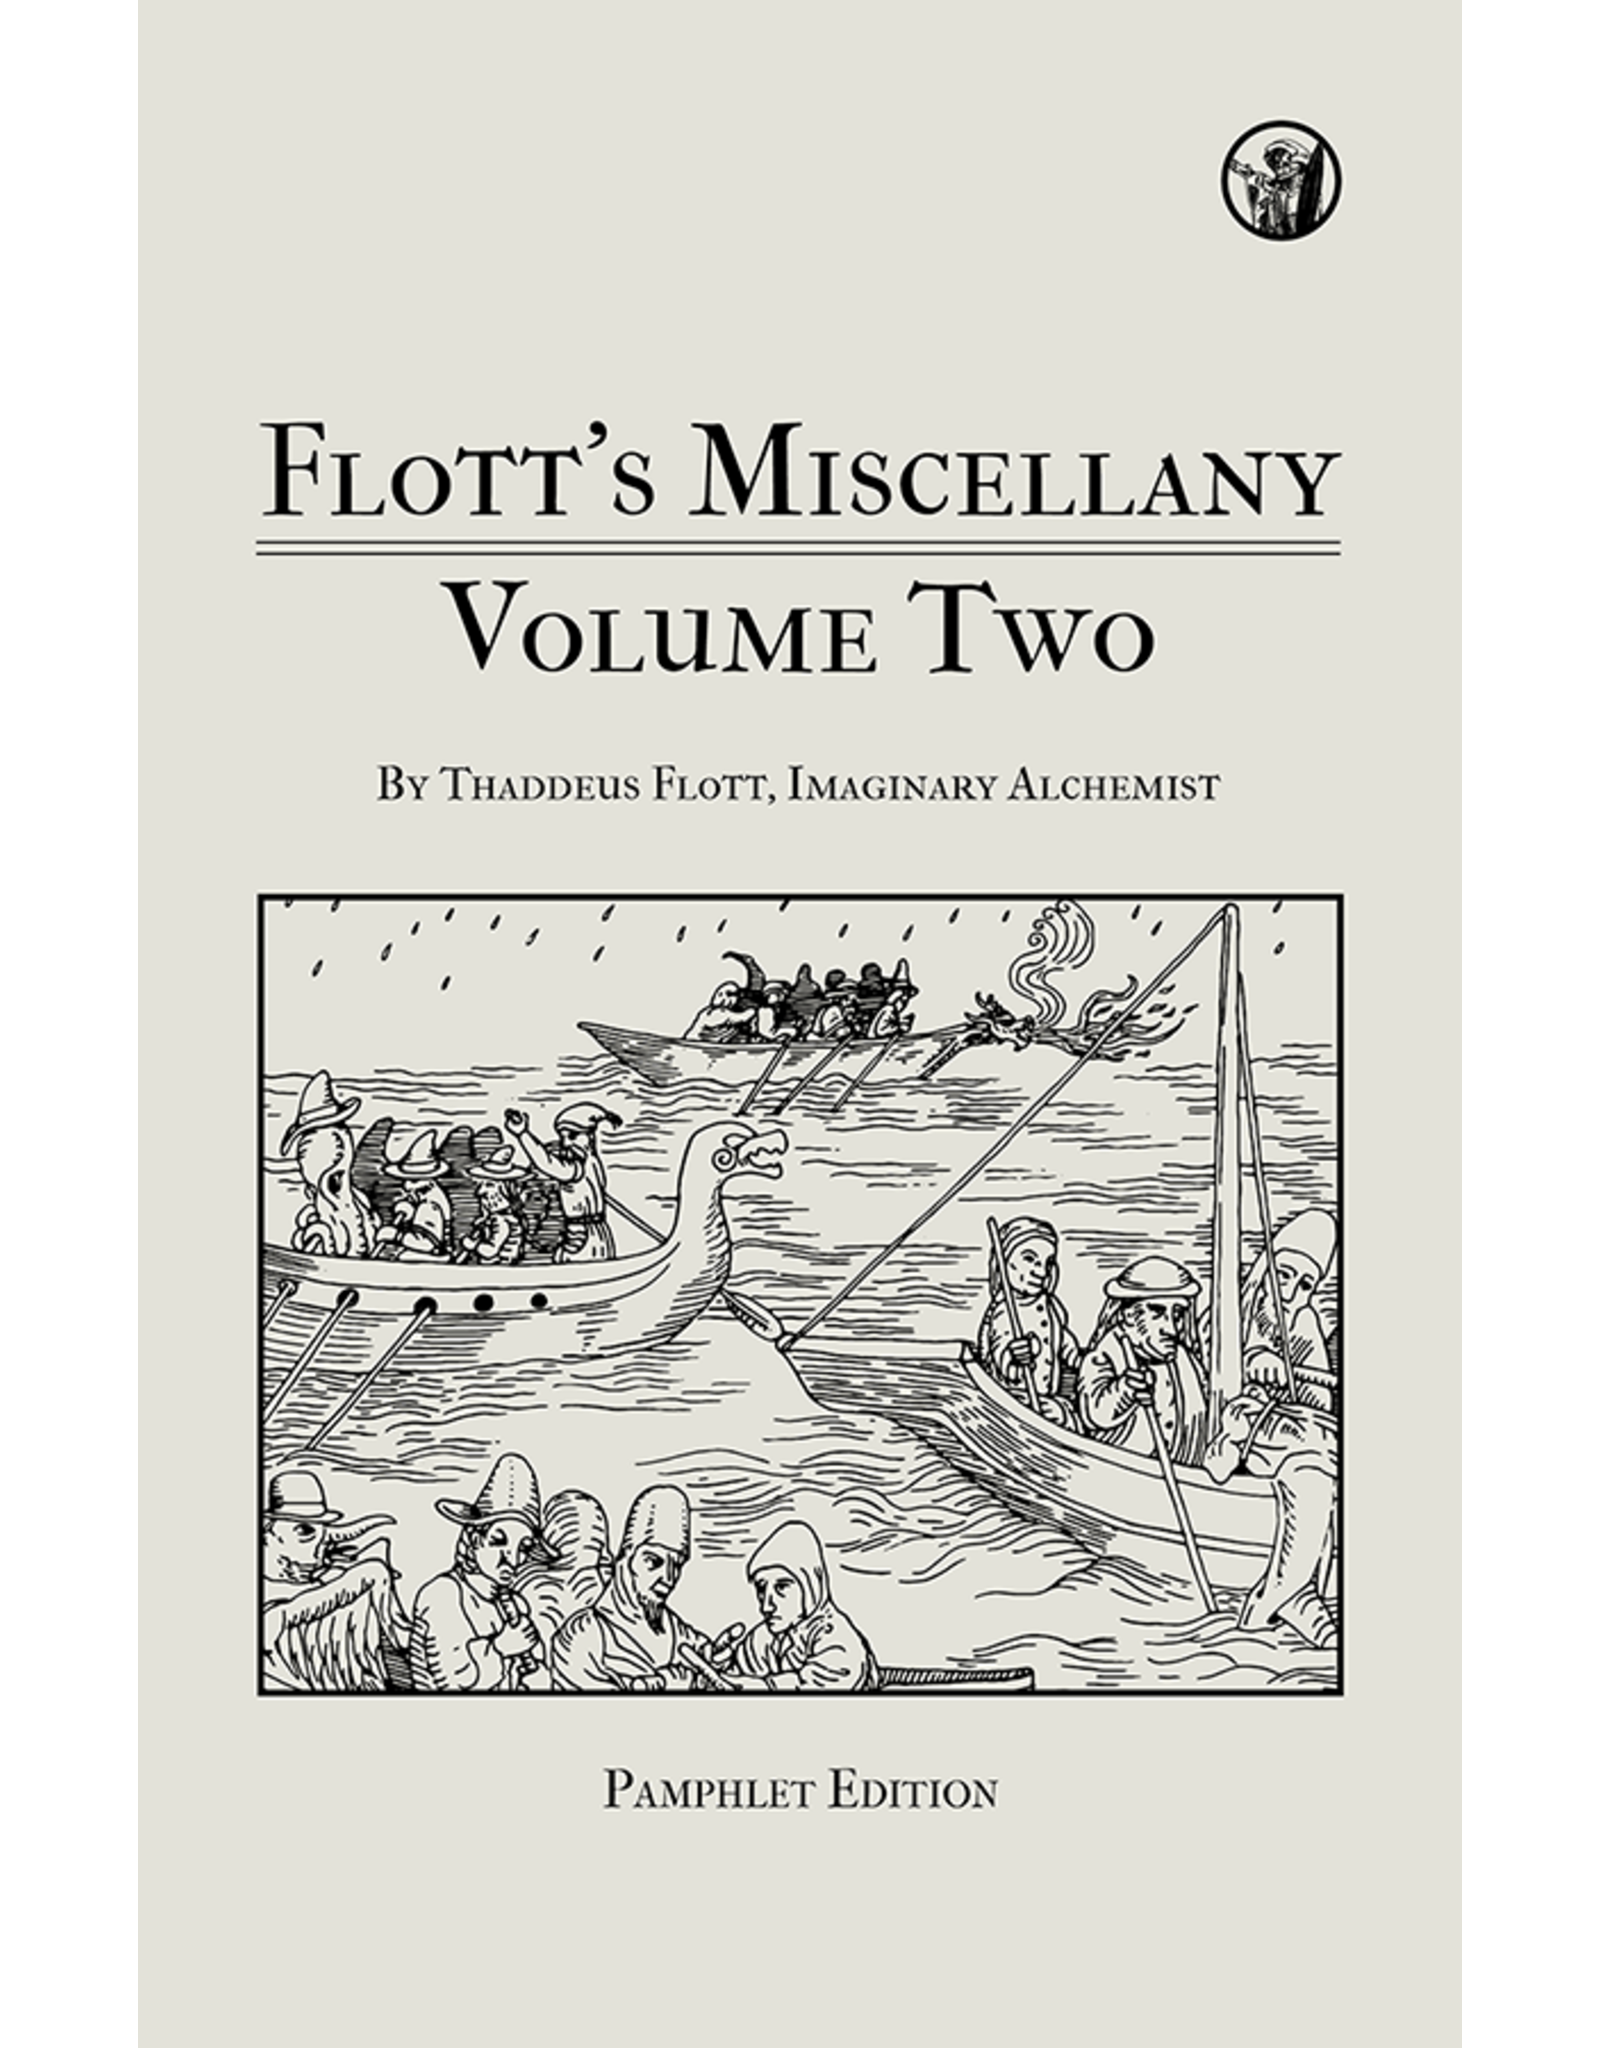 Flott's Miscellany Volume Two - Pamphlet Edition